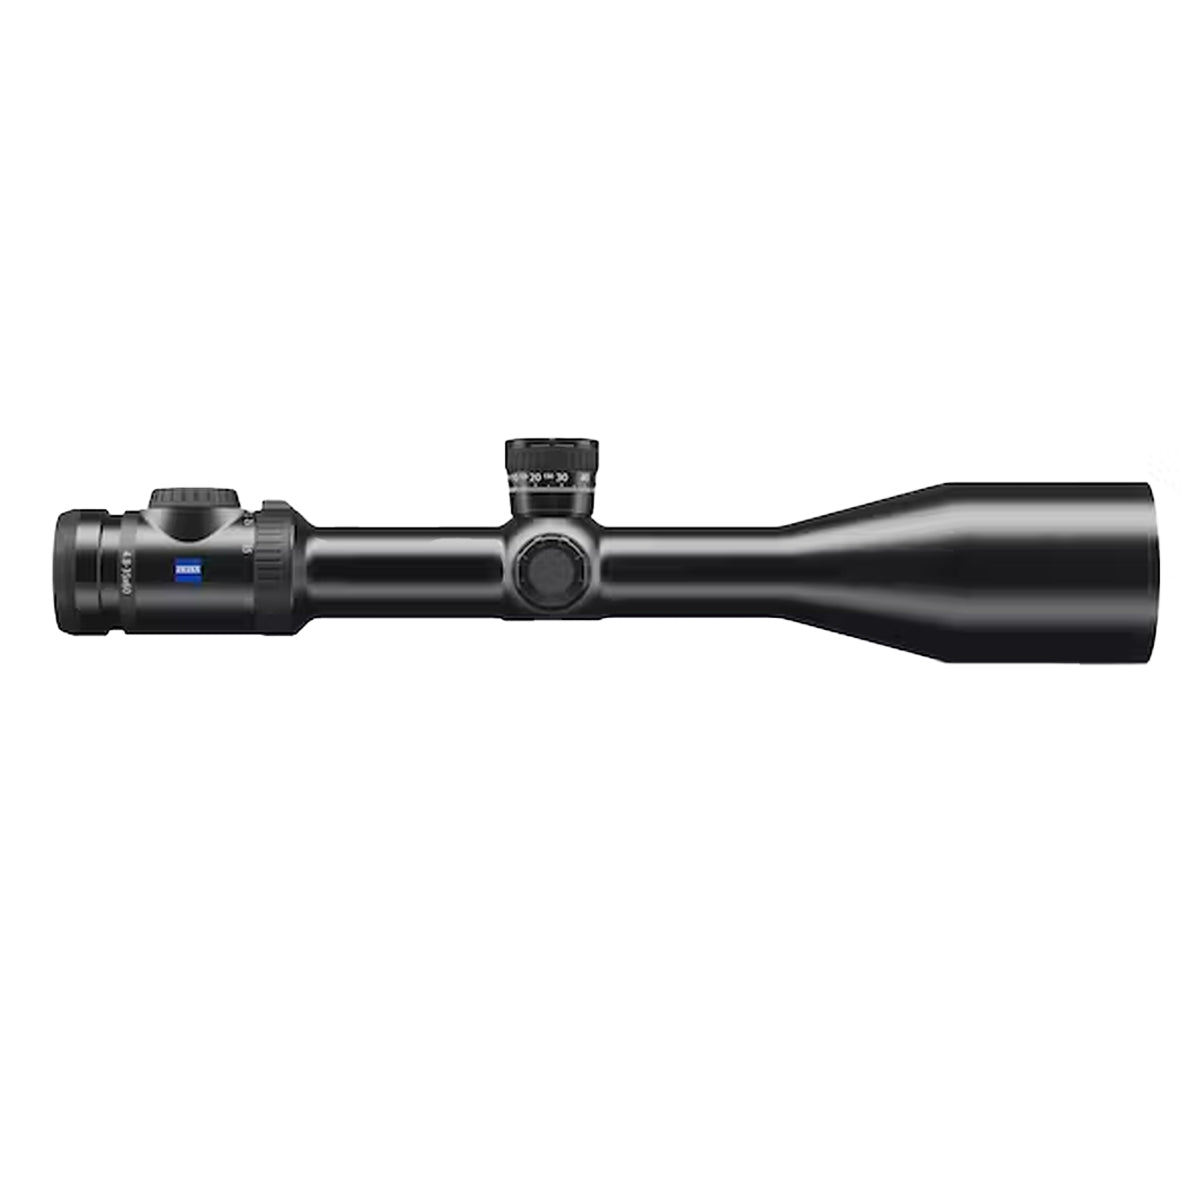 Zeiss V8 4.8-35x60 w/ Illuminated Plex Reticle #60 Riflescope in  by GOHUNT | Zeiss - GOHUNT Shop